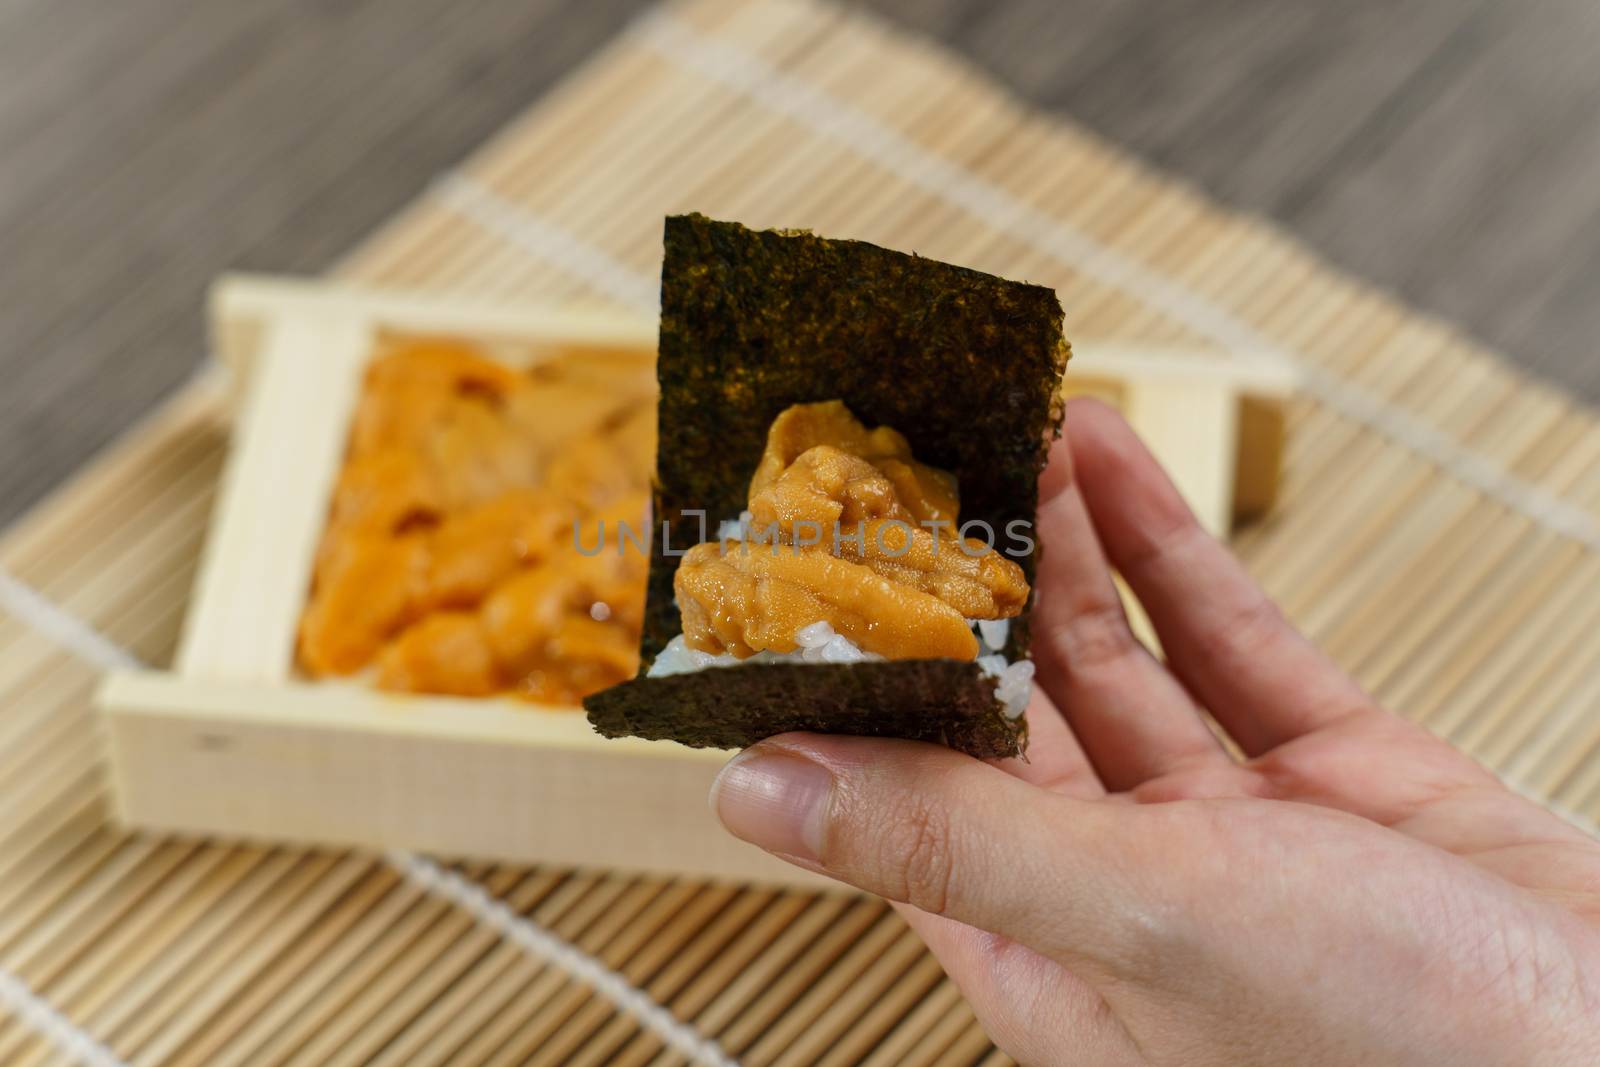 Uni Japanese sea urchin with rice and seaweed in hand. by sirawit99